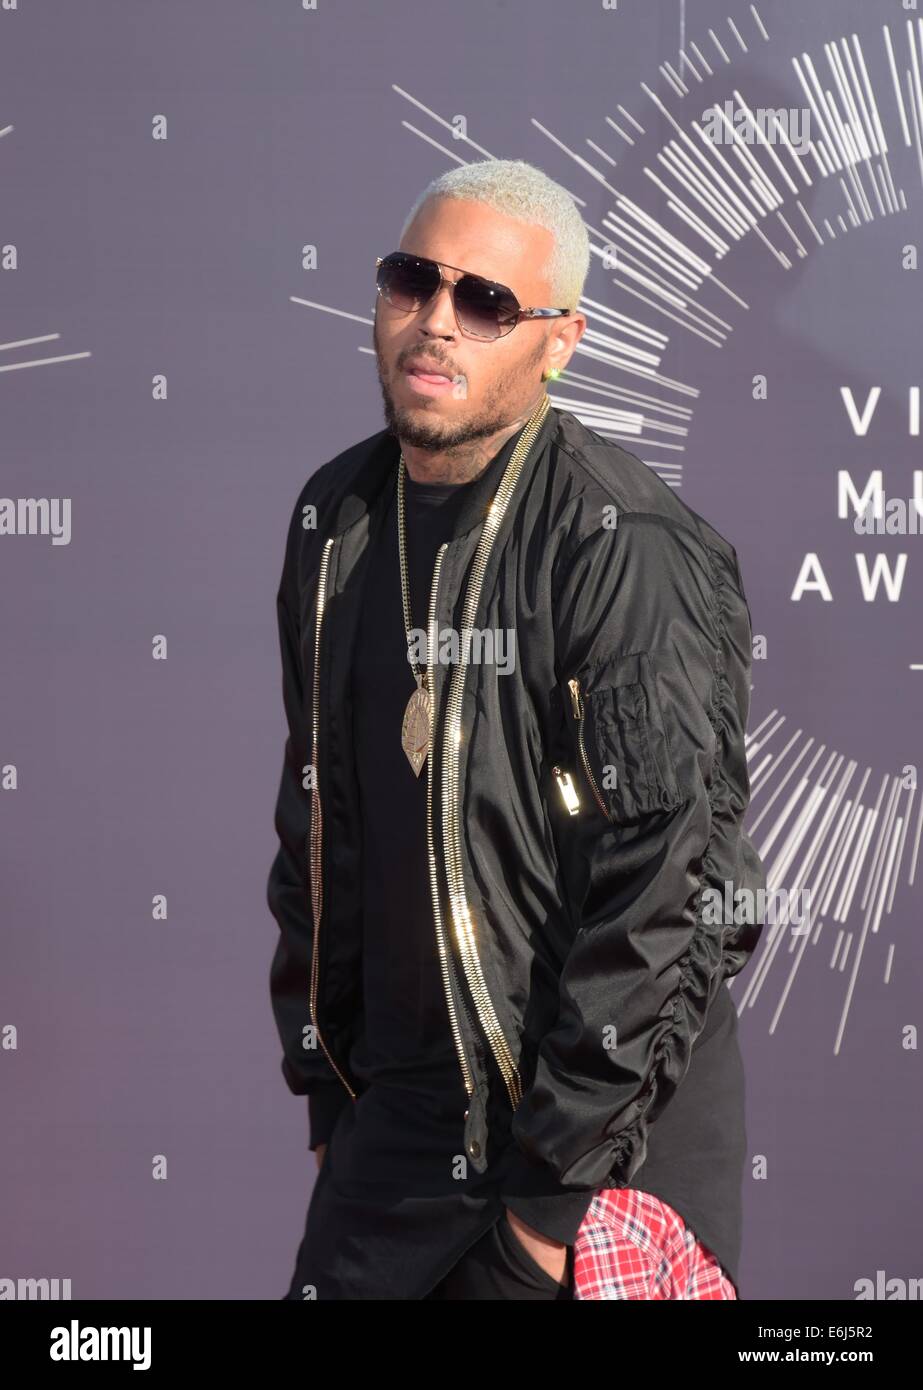 Inglewood, California, USA. 24th Aug, 2014. US musician Chris Brown arrives on the red carpet for the 31st MTV Video Music Awards at The Forum in Inglewood, California, USA, 24 August 2014. Photo: Hubert Boesl/dpa/Alamy Live News Stock Photo